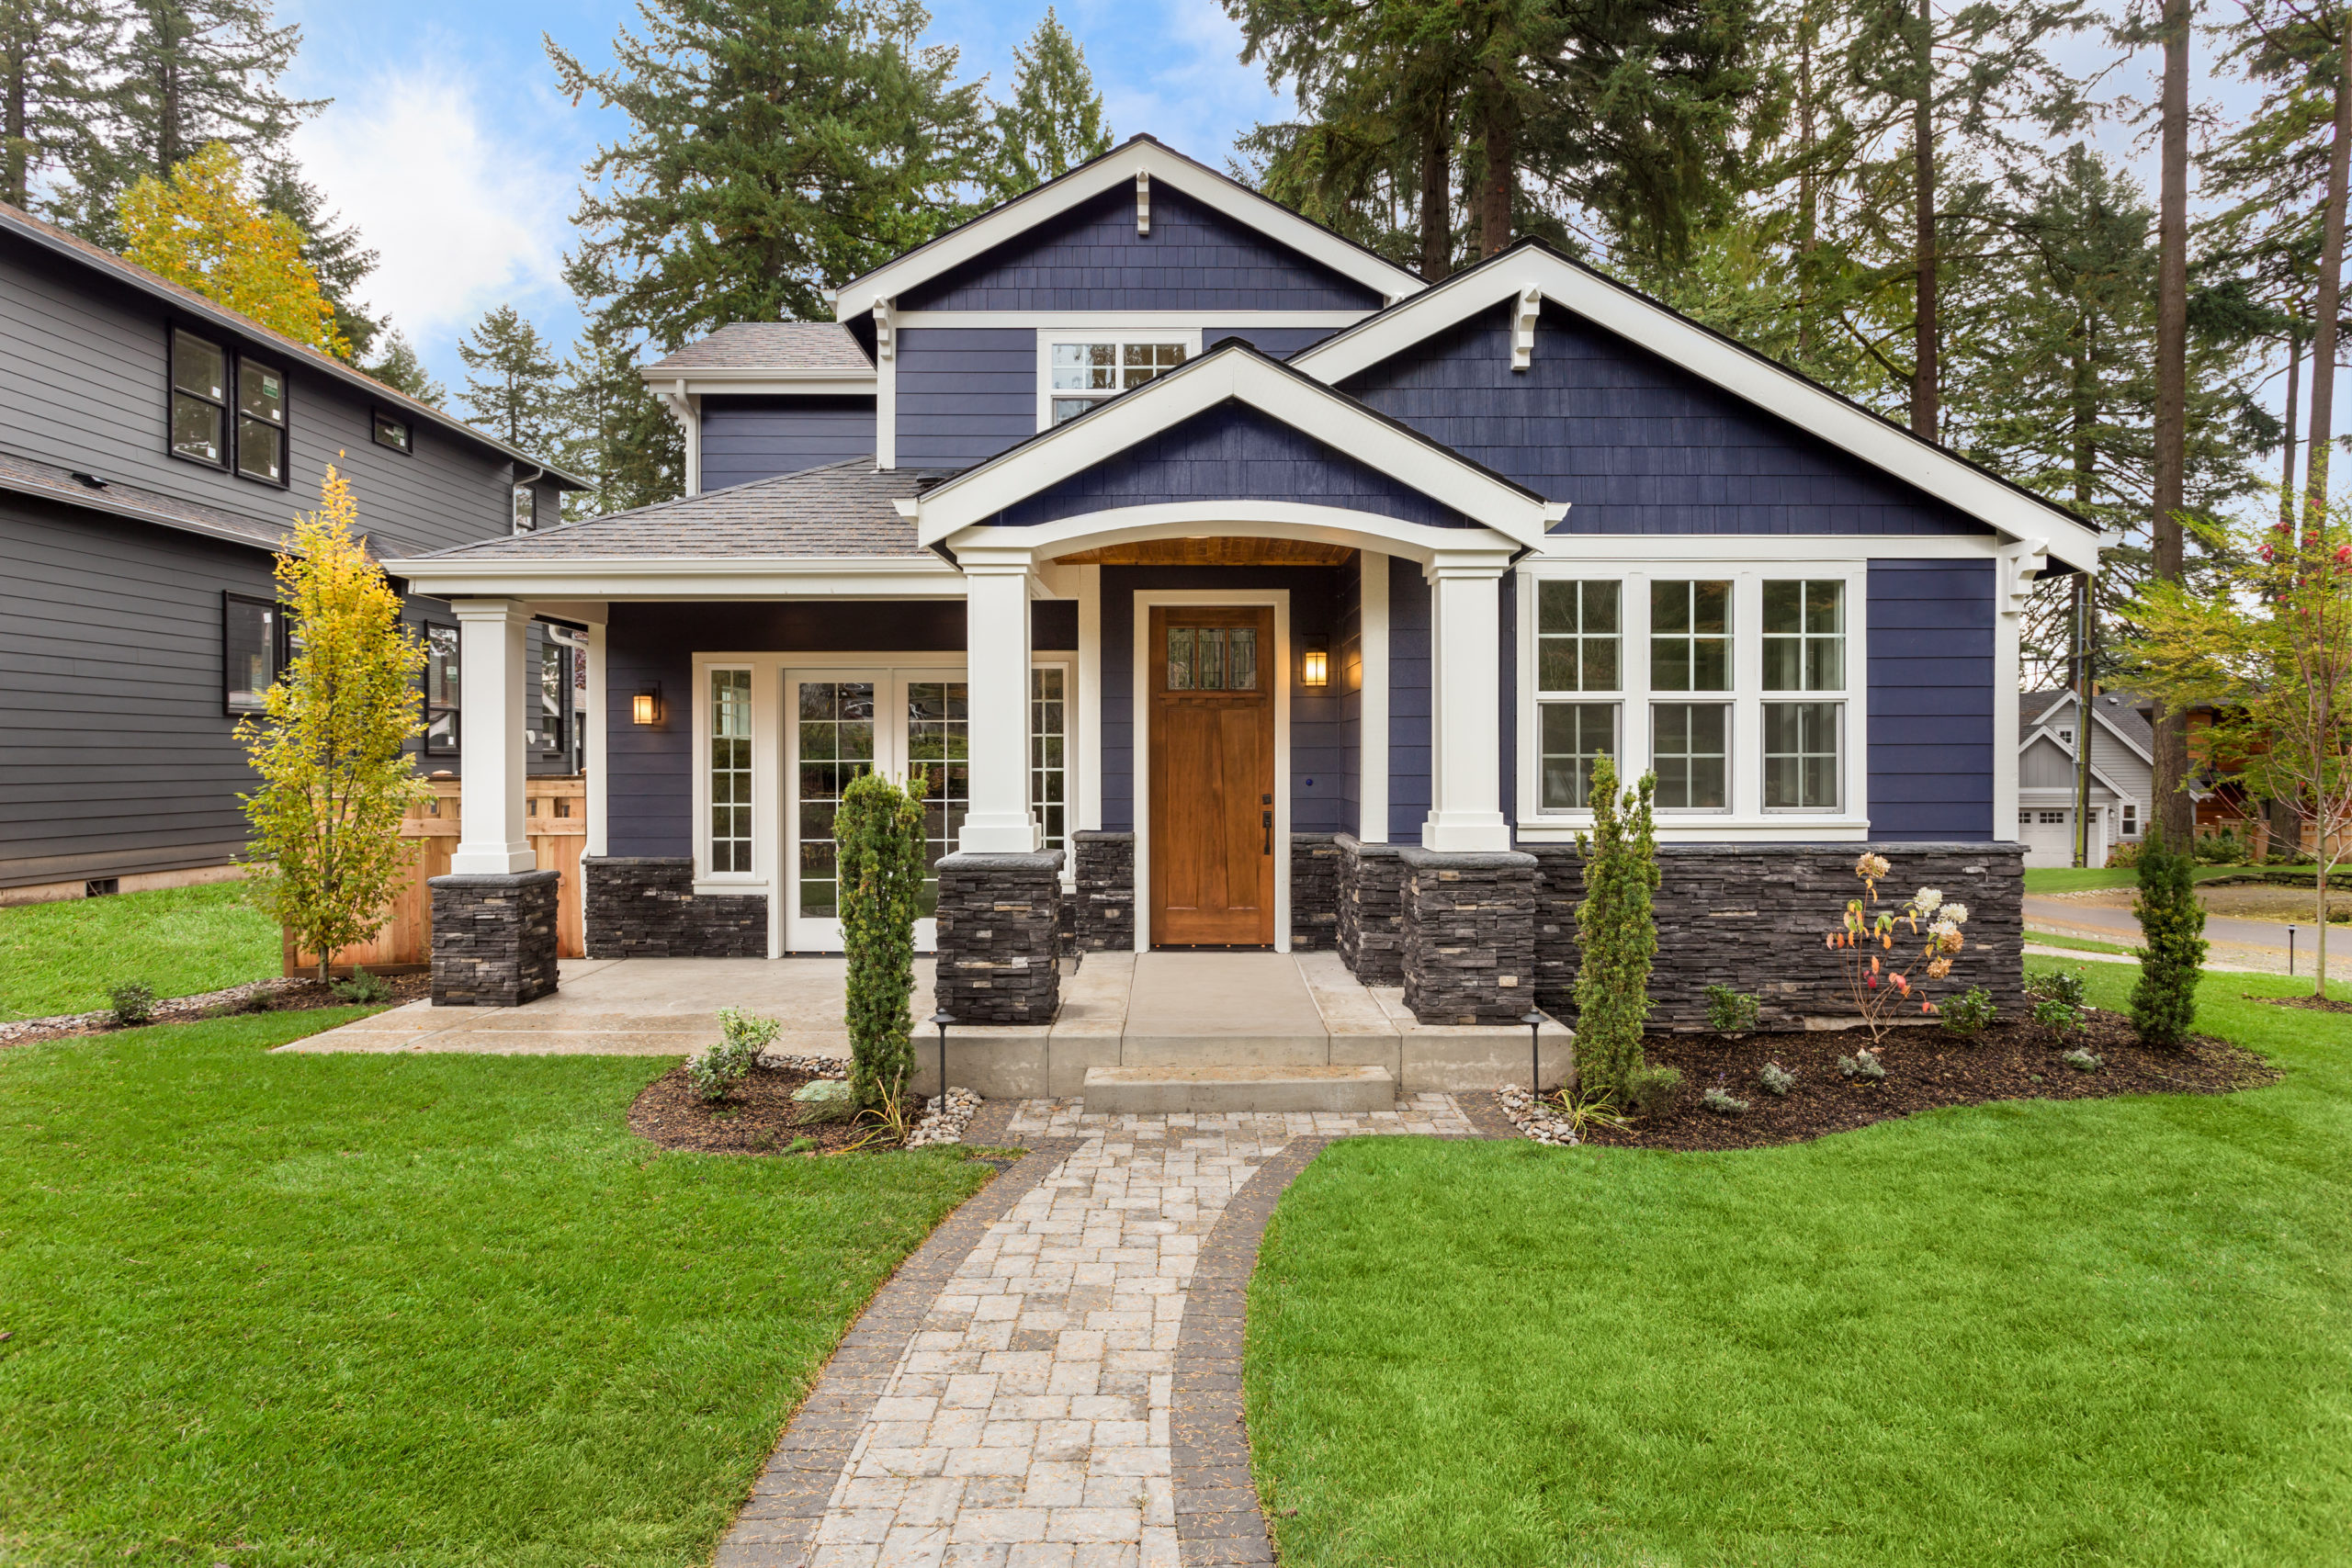 3 Tips for Picking the Perfect Home for Your Retirement Years